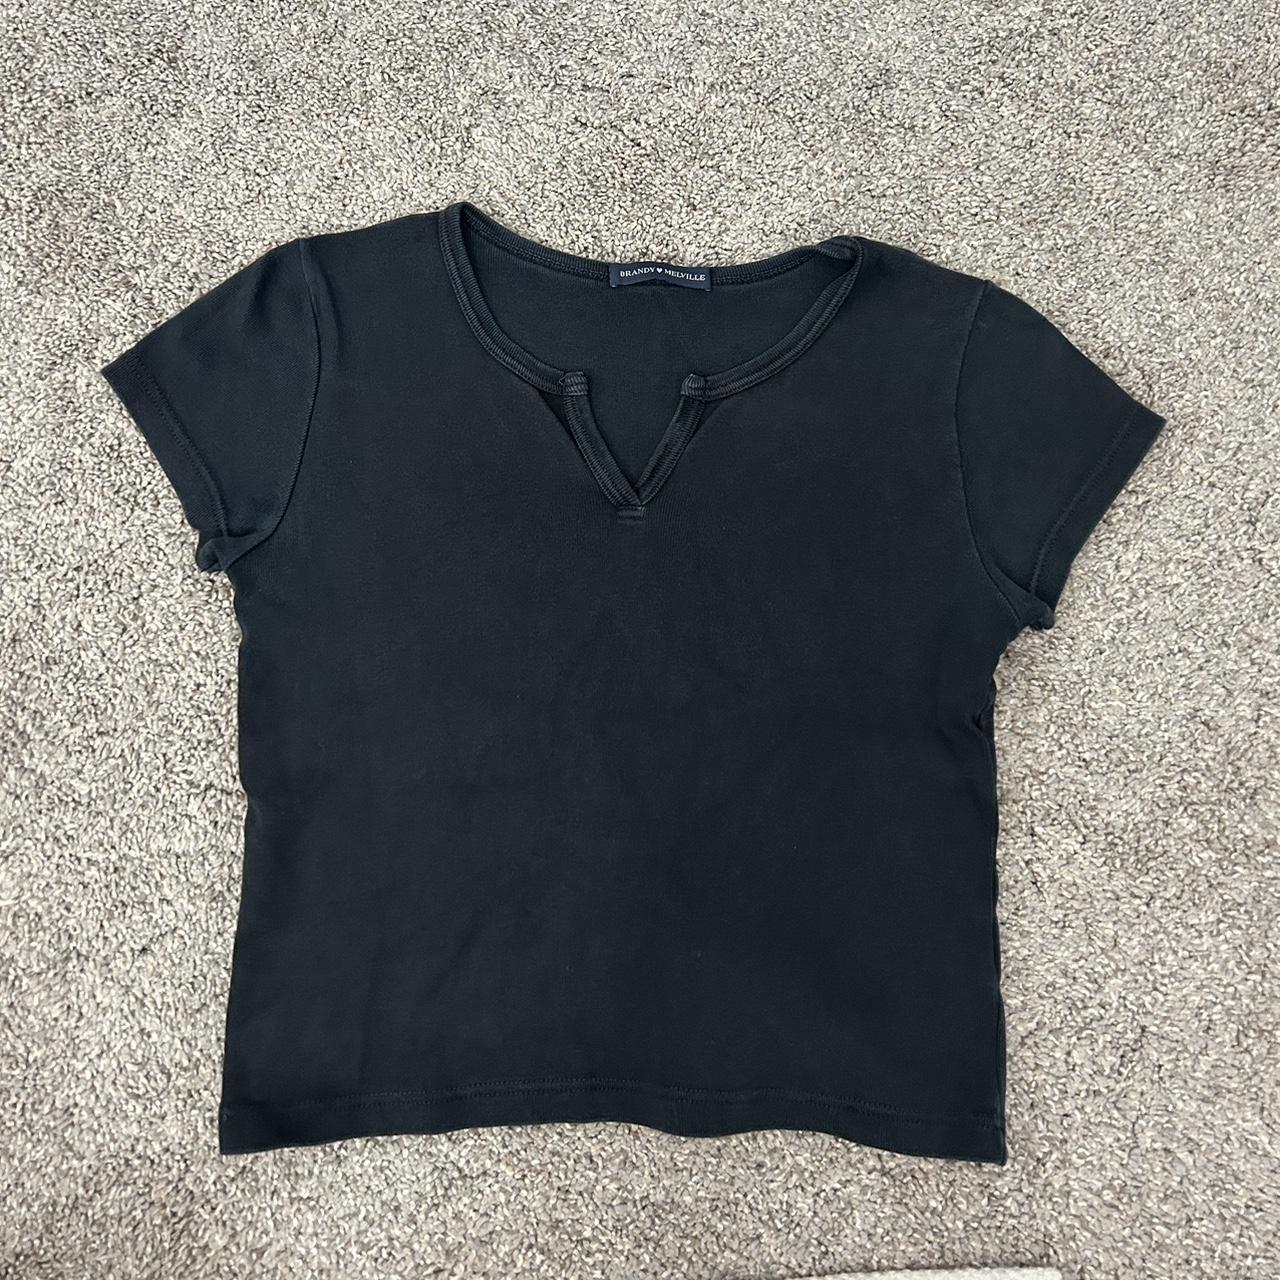 brandy v cut out top - used several times but in... - Depop